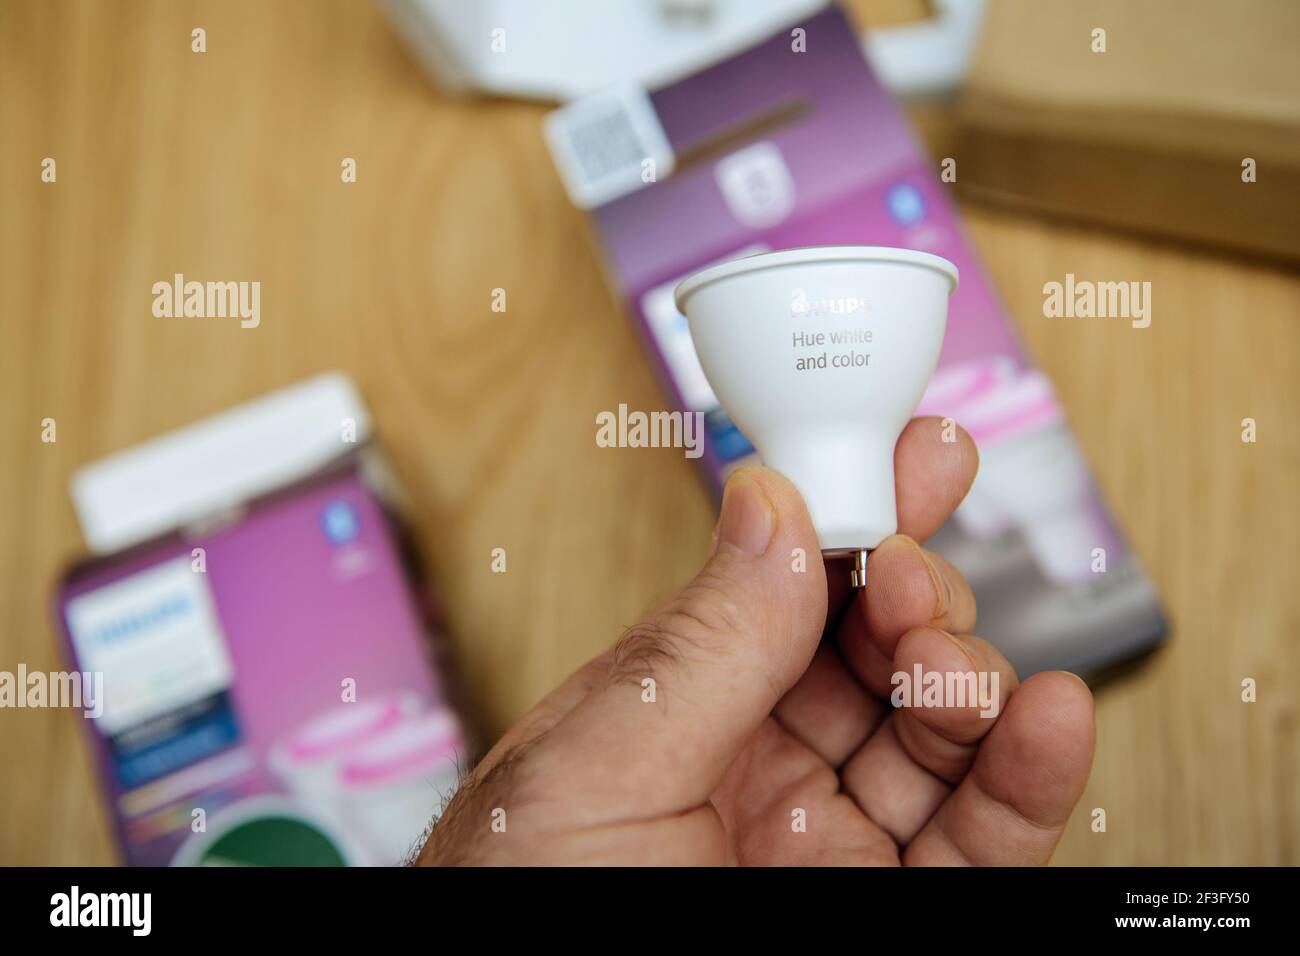 POV male hand holding new Philips Hue GU10 color lamp right after unboxing  Stock Photo - Alamy